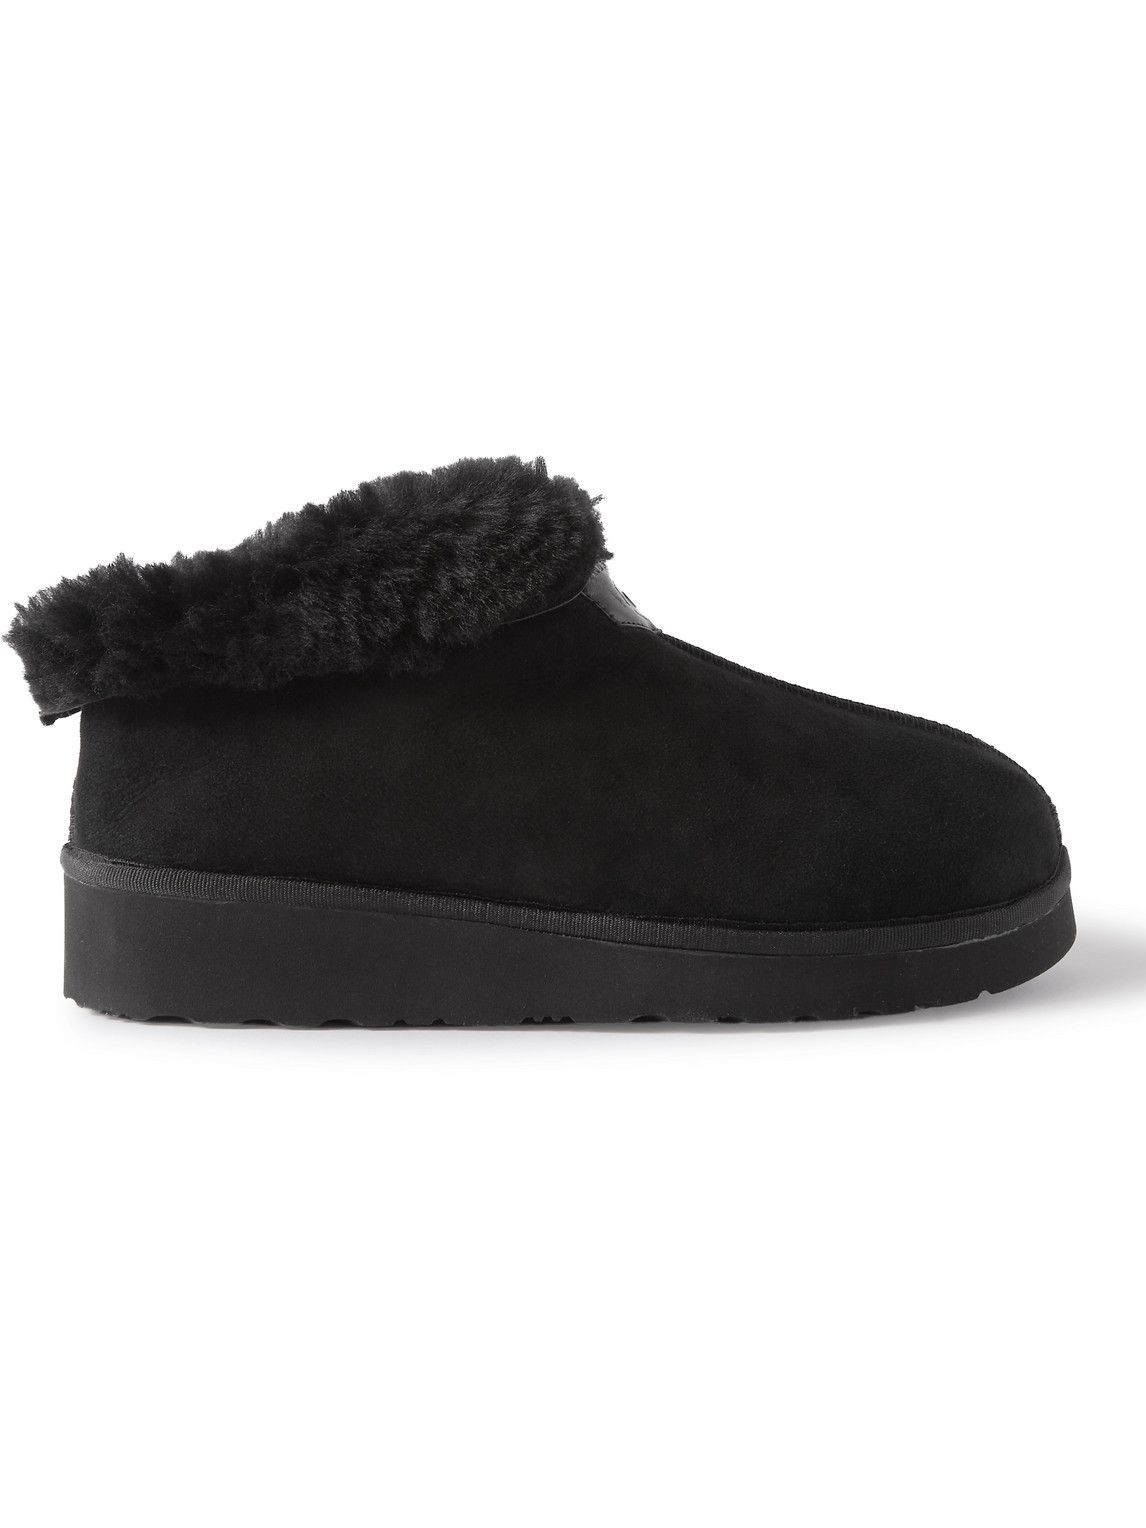 Photo: Grenson - Wyeth Shearling-Lined Suede Slippers - Black